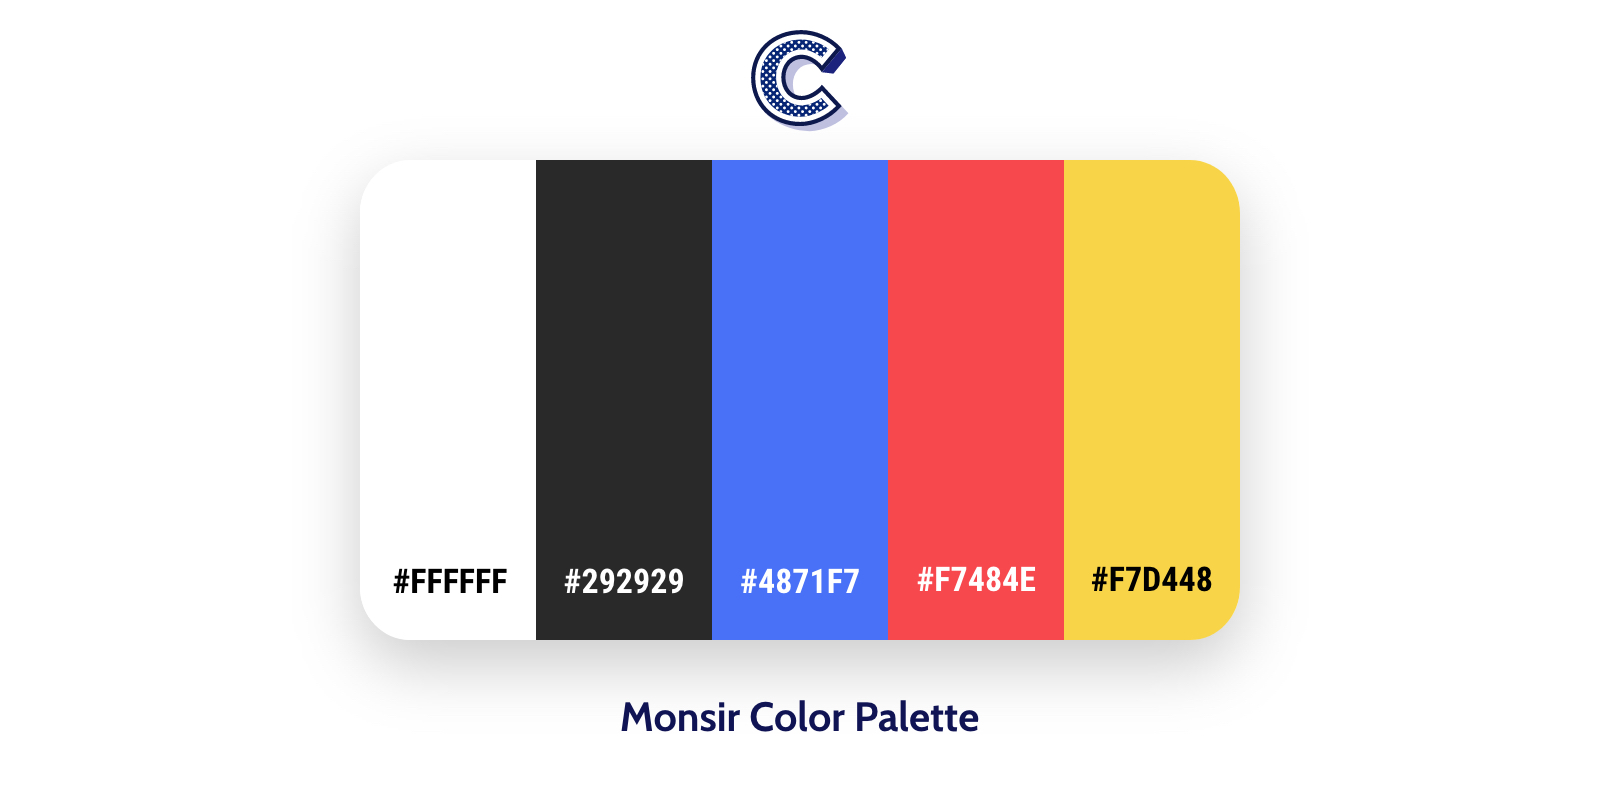 the featured image of monsir color palette